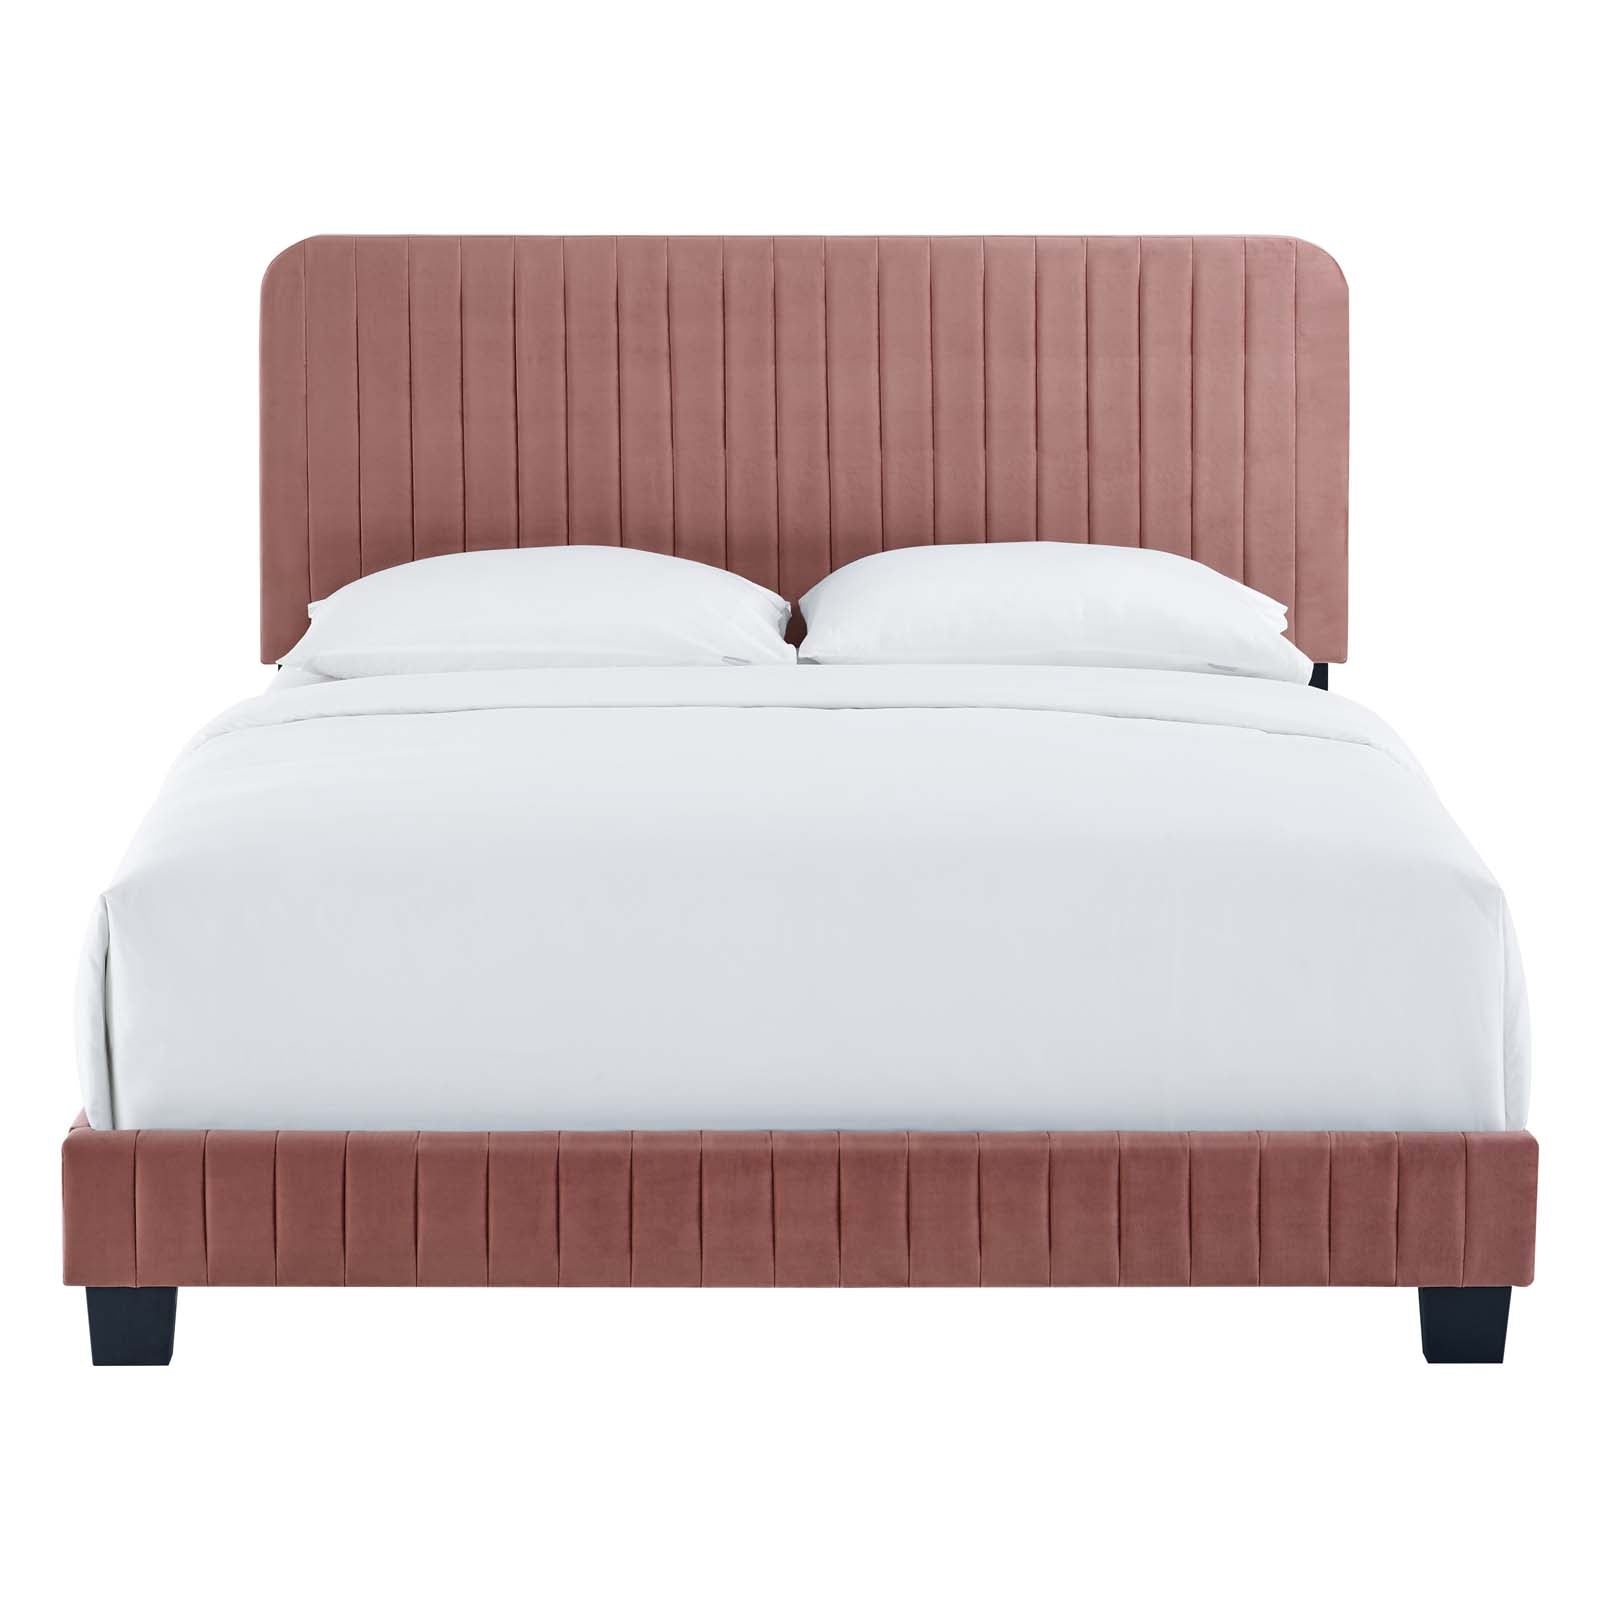 Modway Beds - Celine Channel Tufted Performance Velvet Queen Bed Dusty Rose